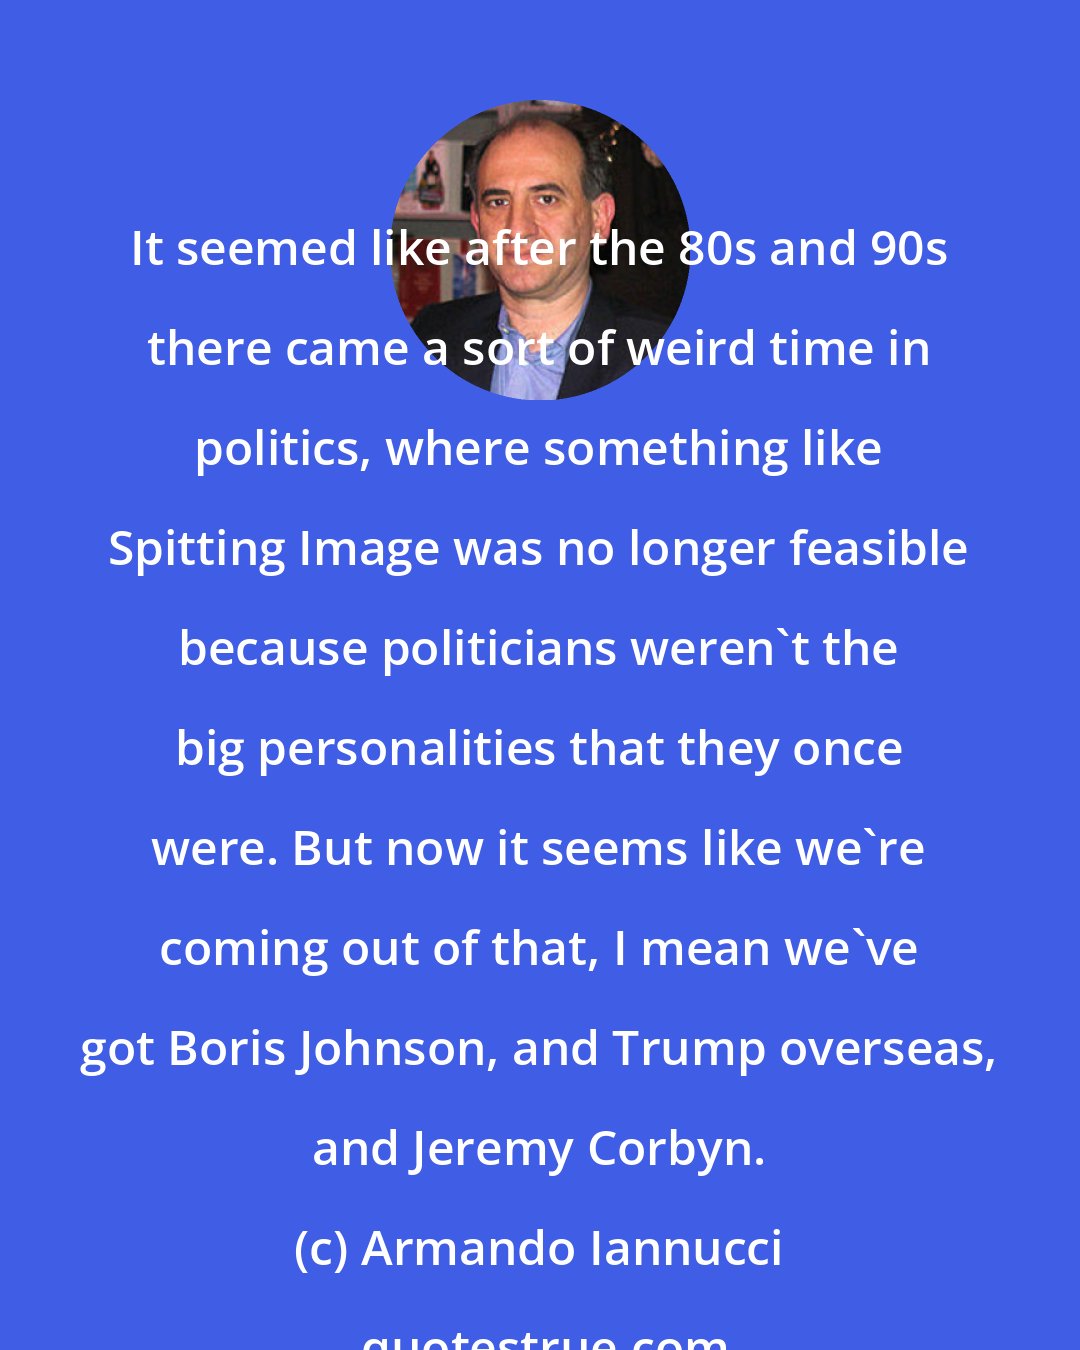 Armando Iannucci: It seemed like after the 80s and 90s there came a sort of weird time in politics, where something like Spitting Image was no longer feasible because politicians weren't the big personalities that they once were. But now it seems like we're coming out of that, I mean we've got Boris Johnson, and Trump overseas, and Jeremy Corbyn.